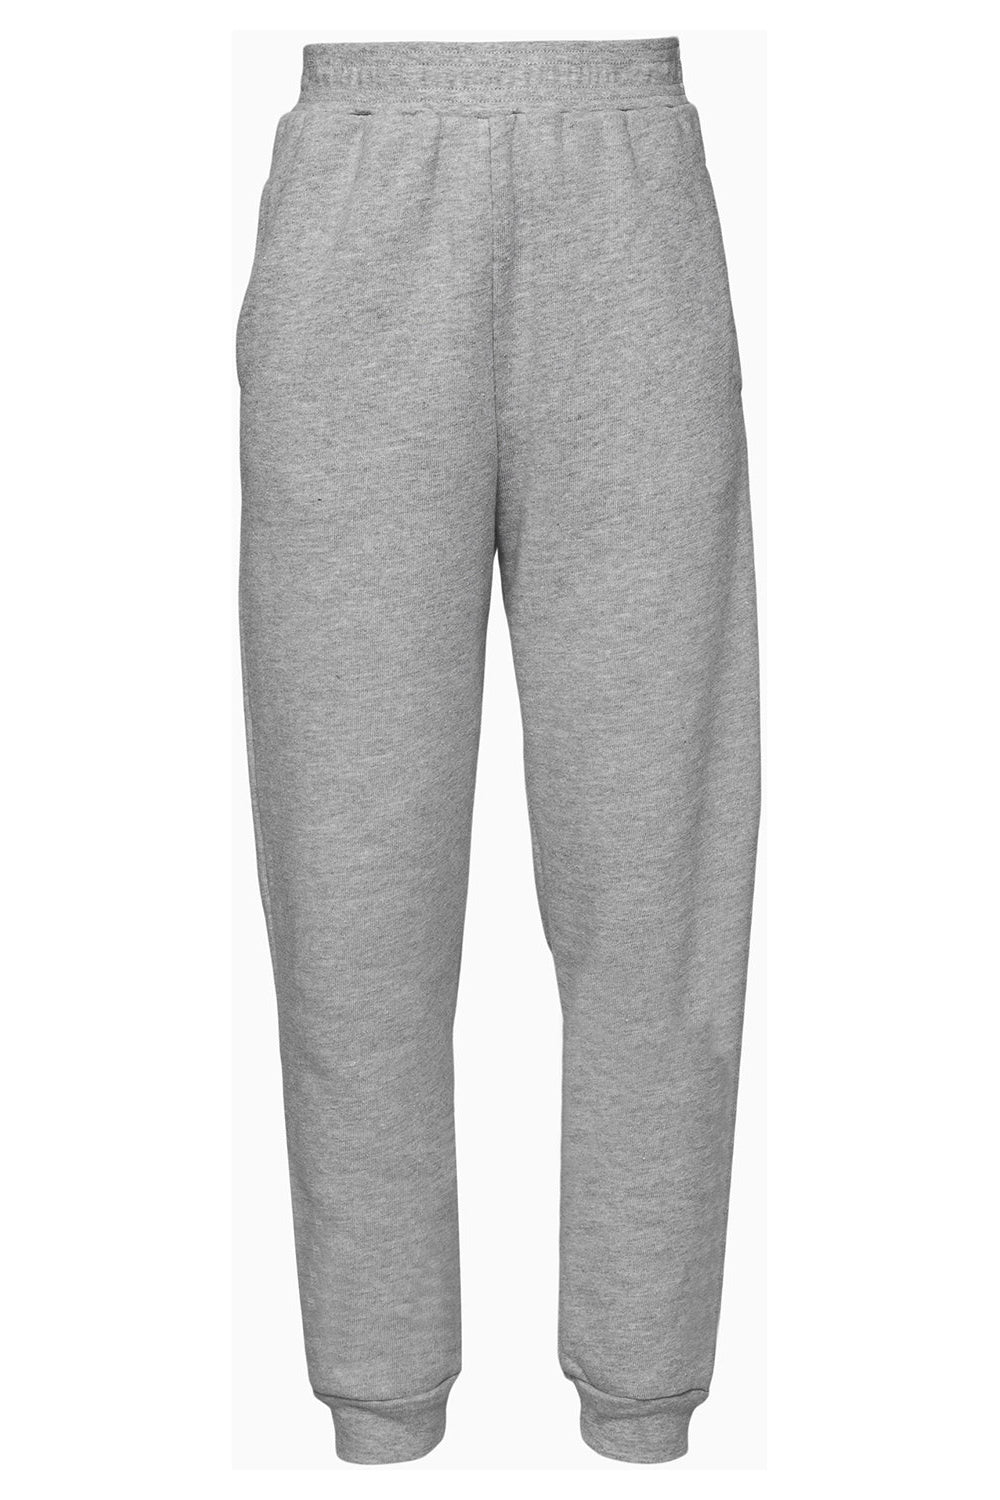 Bella + Canvas 3727Y Youth Jogger Sweatpants Heather Grey Flat Front